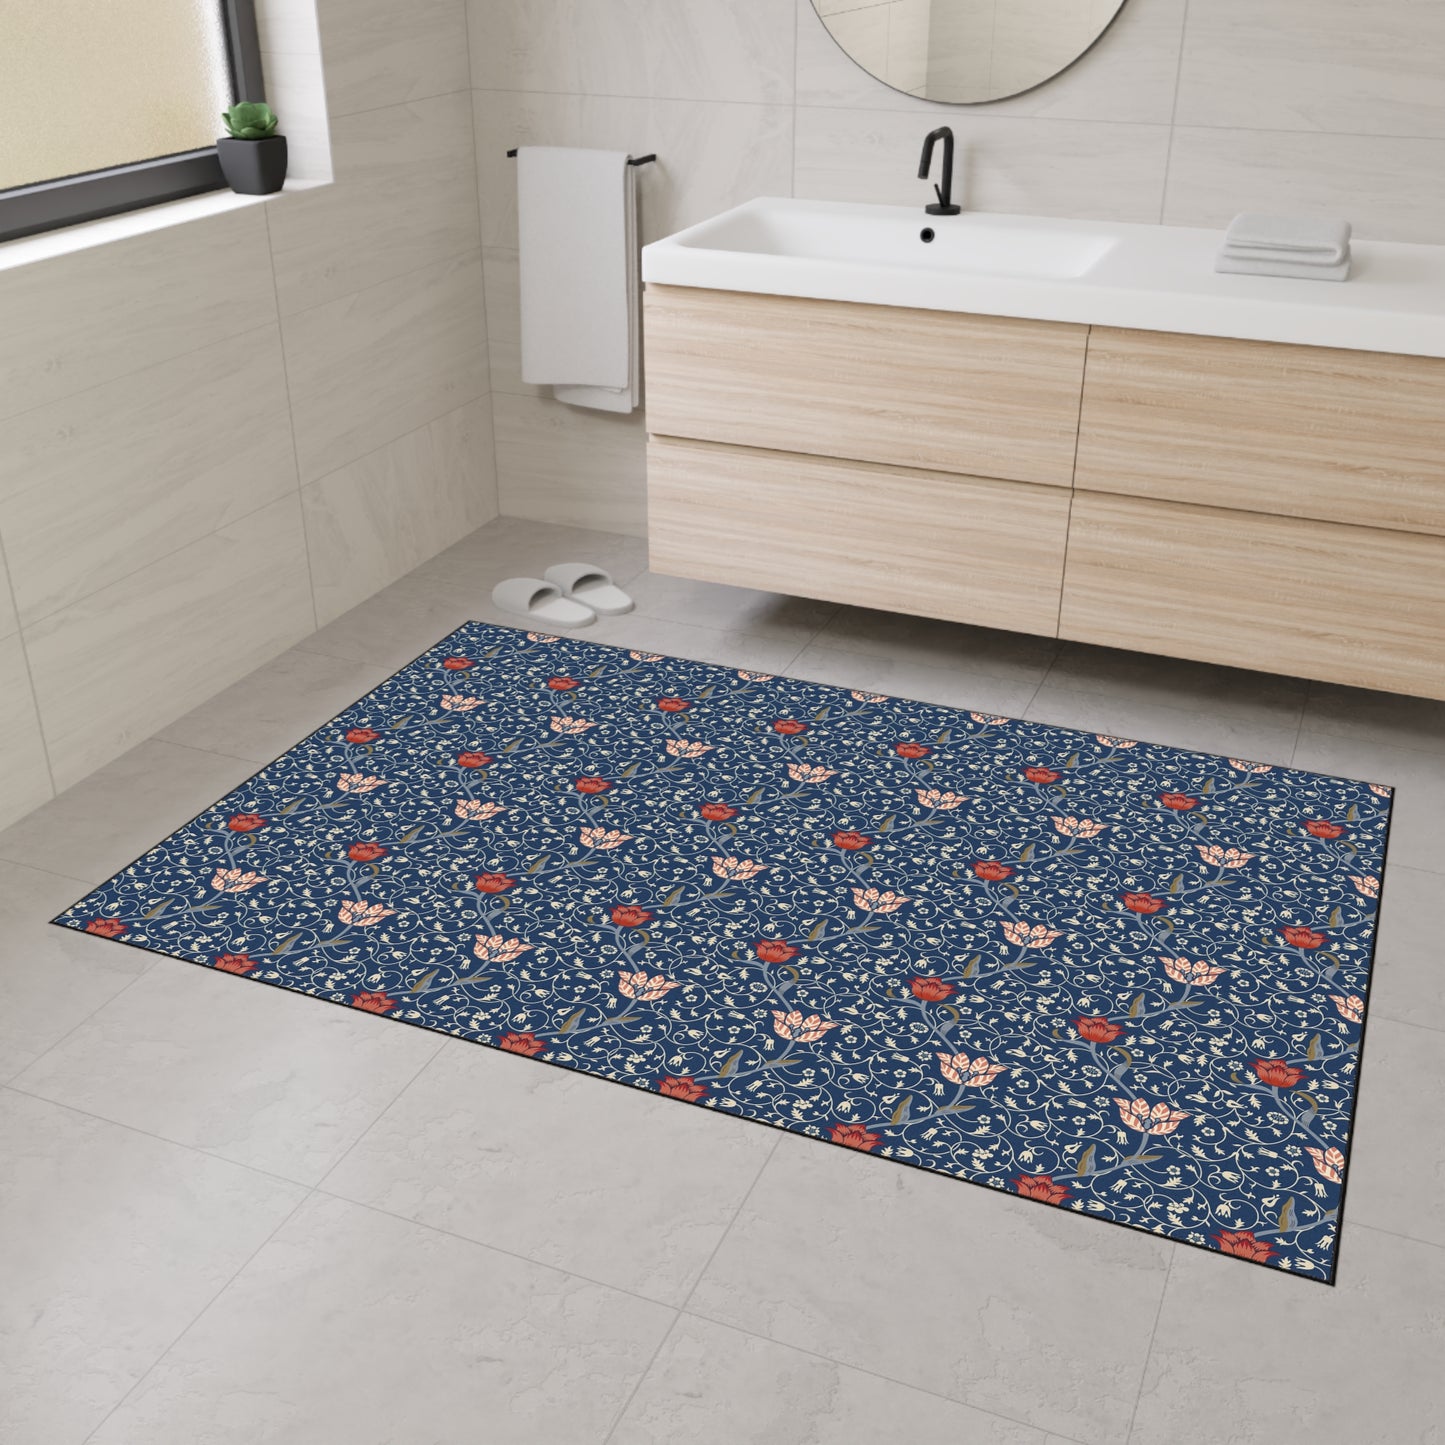 william-morris-co-heavy-duty-floor-mat-medway-collection-8